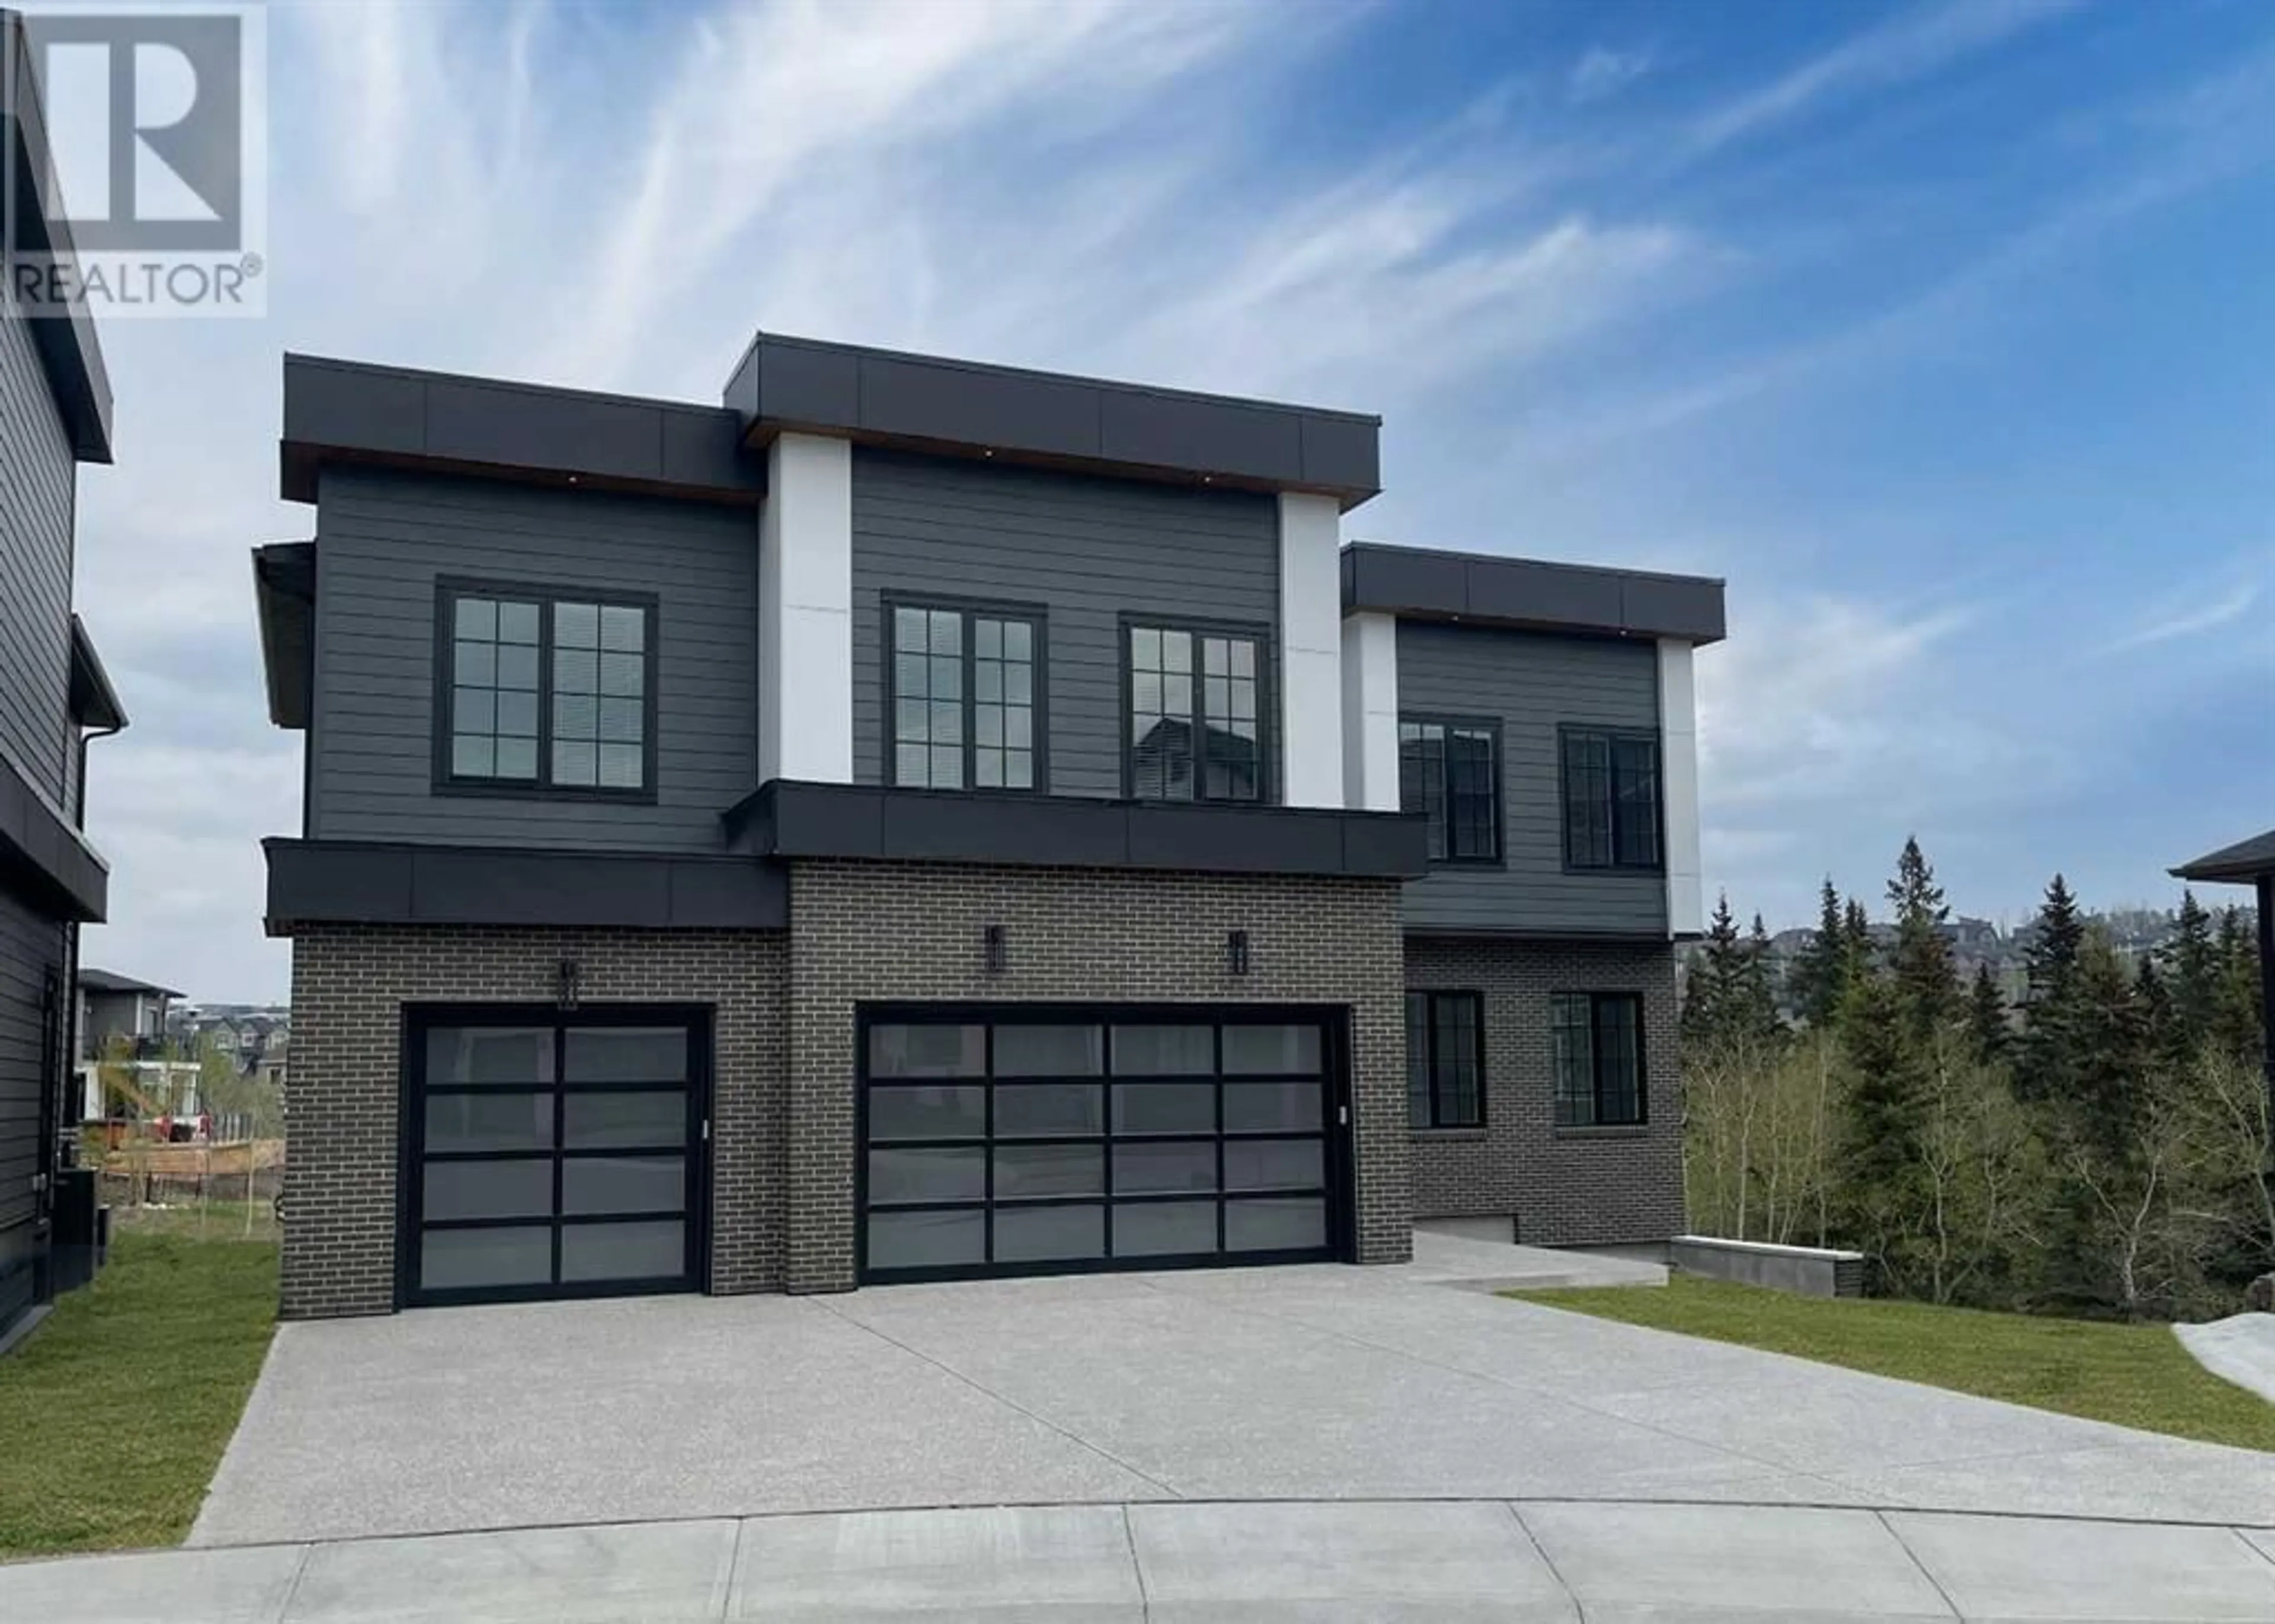 Home with brick exterior material for 25 Timberline Court SW, Calgary Alberta T3H6C8